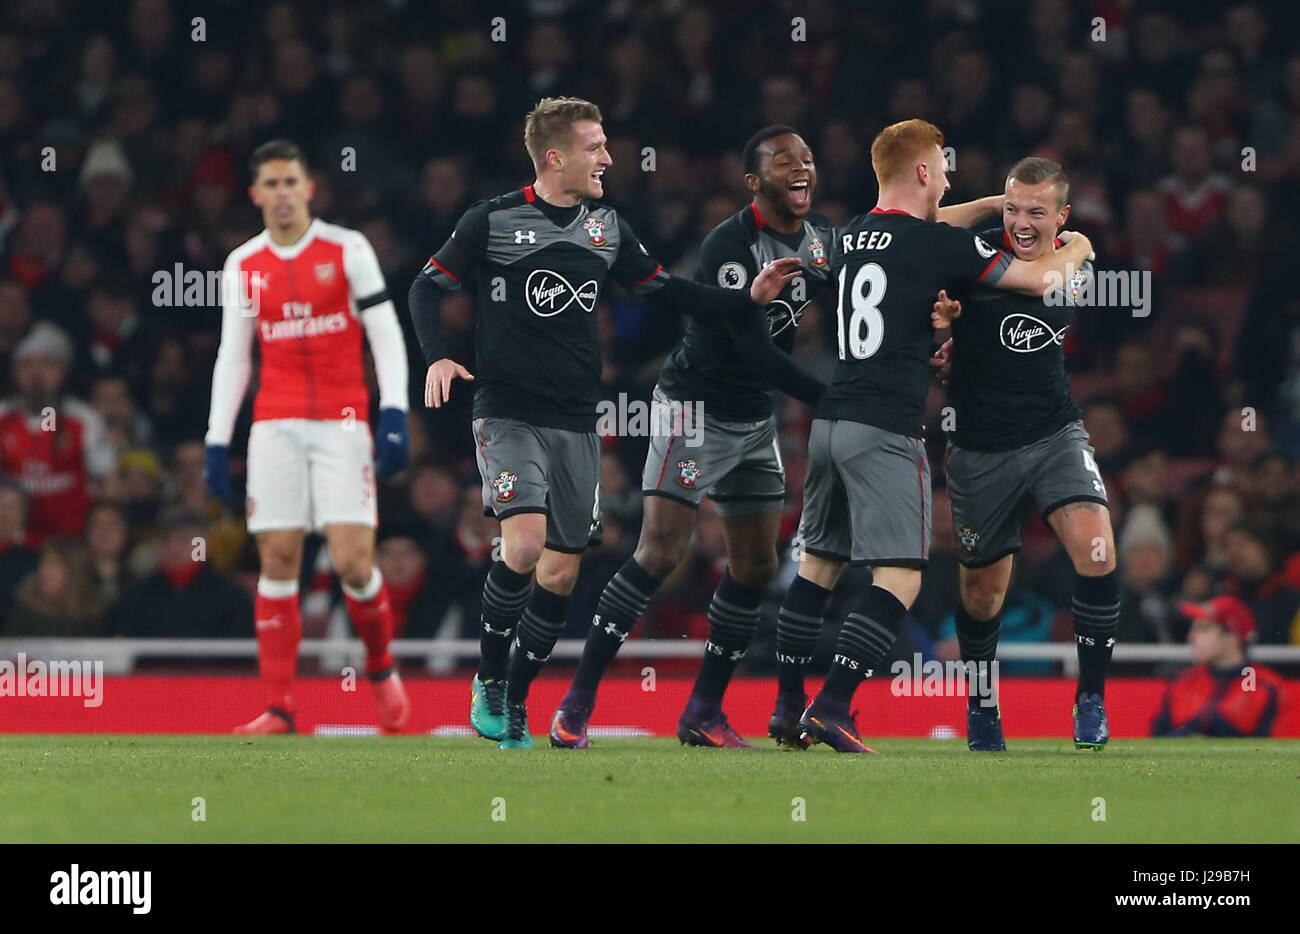 Jordy Clasie of Southampton (R)  celebrates after scoring  during the EFL Cup Quater-final match between Arsenal and Southampton at the Emirates Stadium in London. November 30, 2016. EDITORIAL USE ONLY - FA Premier League and Football League images are subject to DataCo Licence see www.football-dataco.com Stock Photo